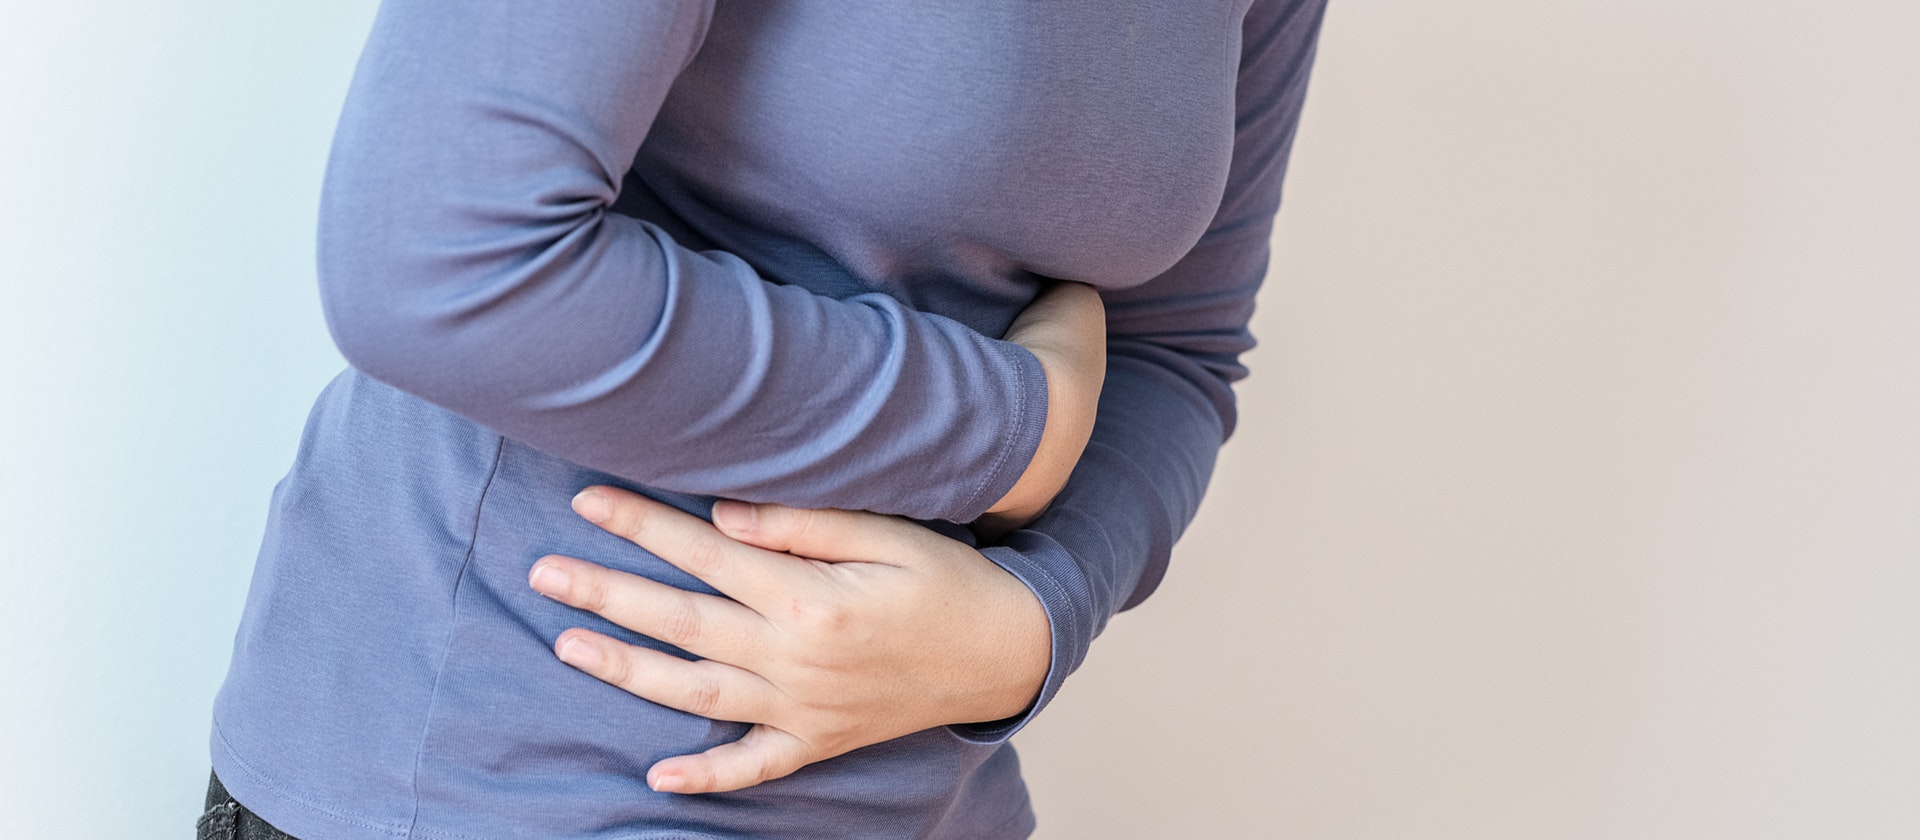 diverticulitis symptoms, causes, and treatment